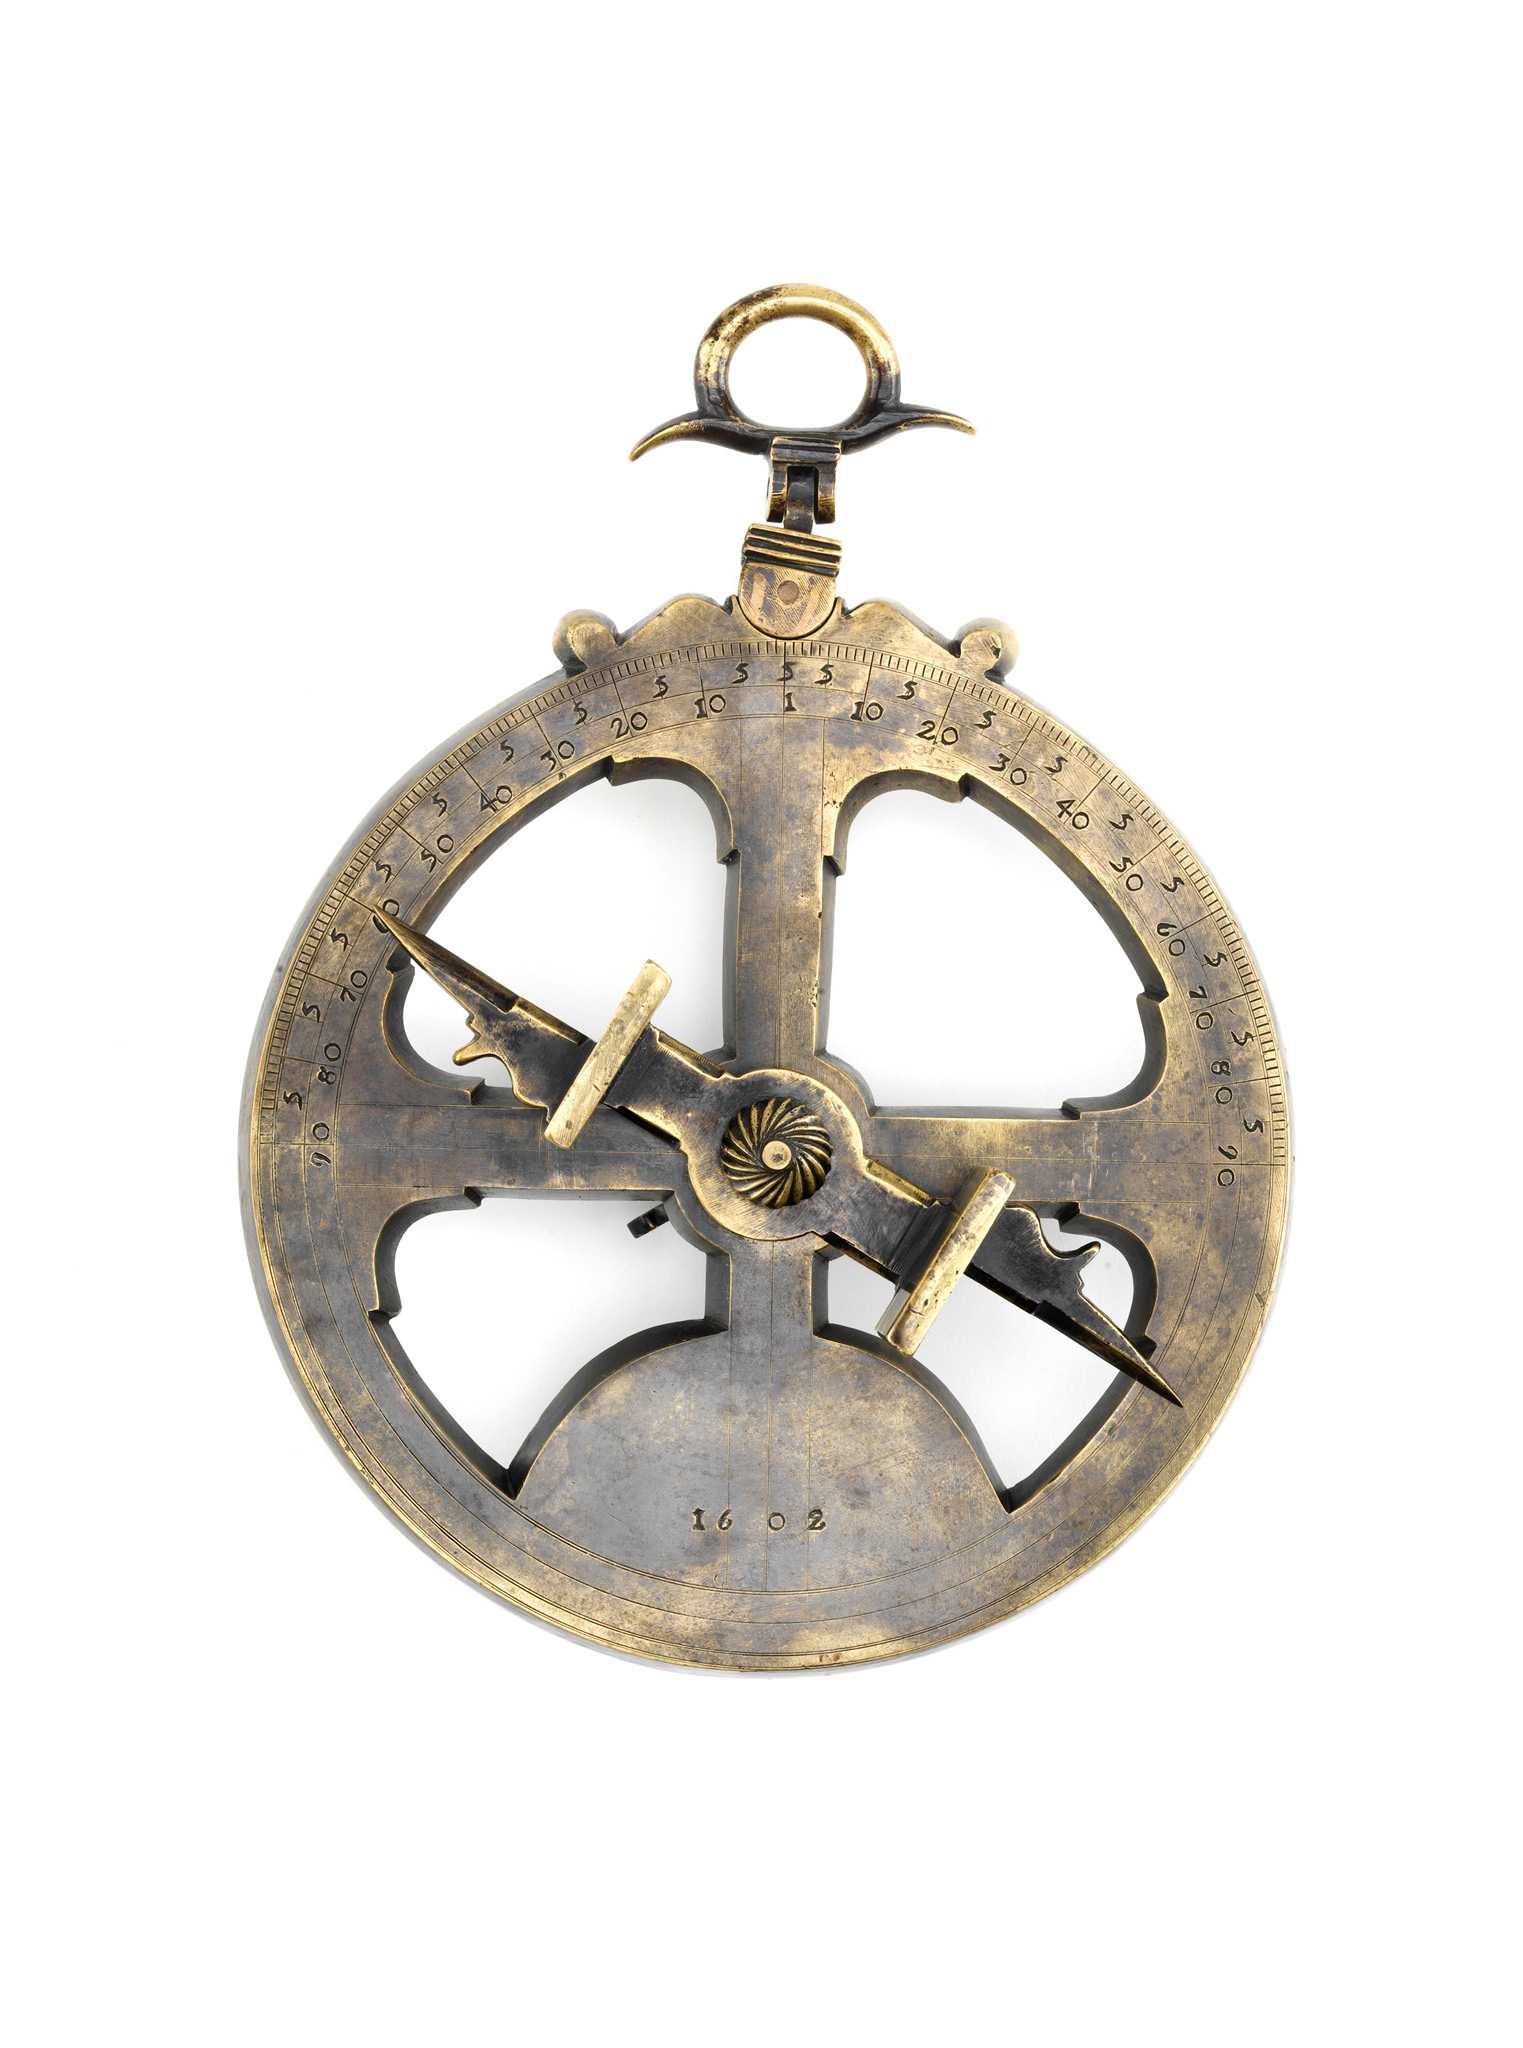 An astrolabe on display against a white background. The astrolabe has a gold and gray tarnish with the numbers 1602 pressed into the bottom.